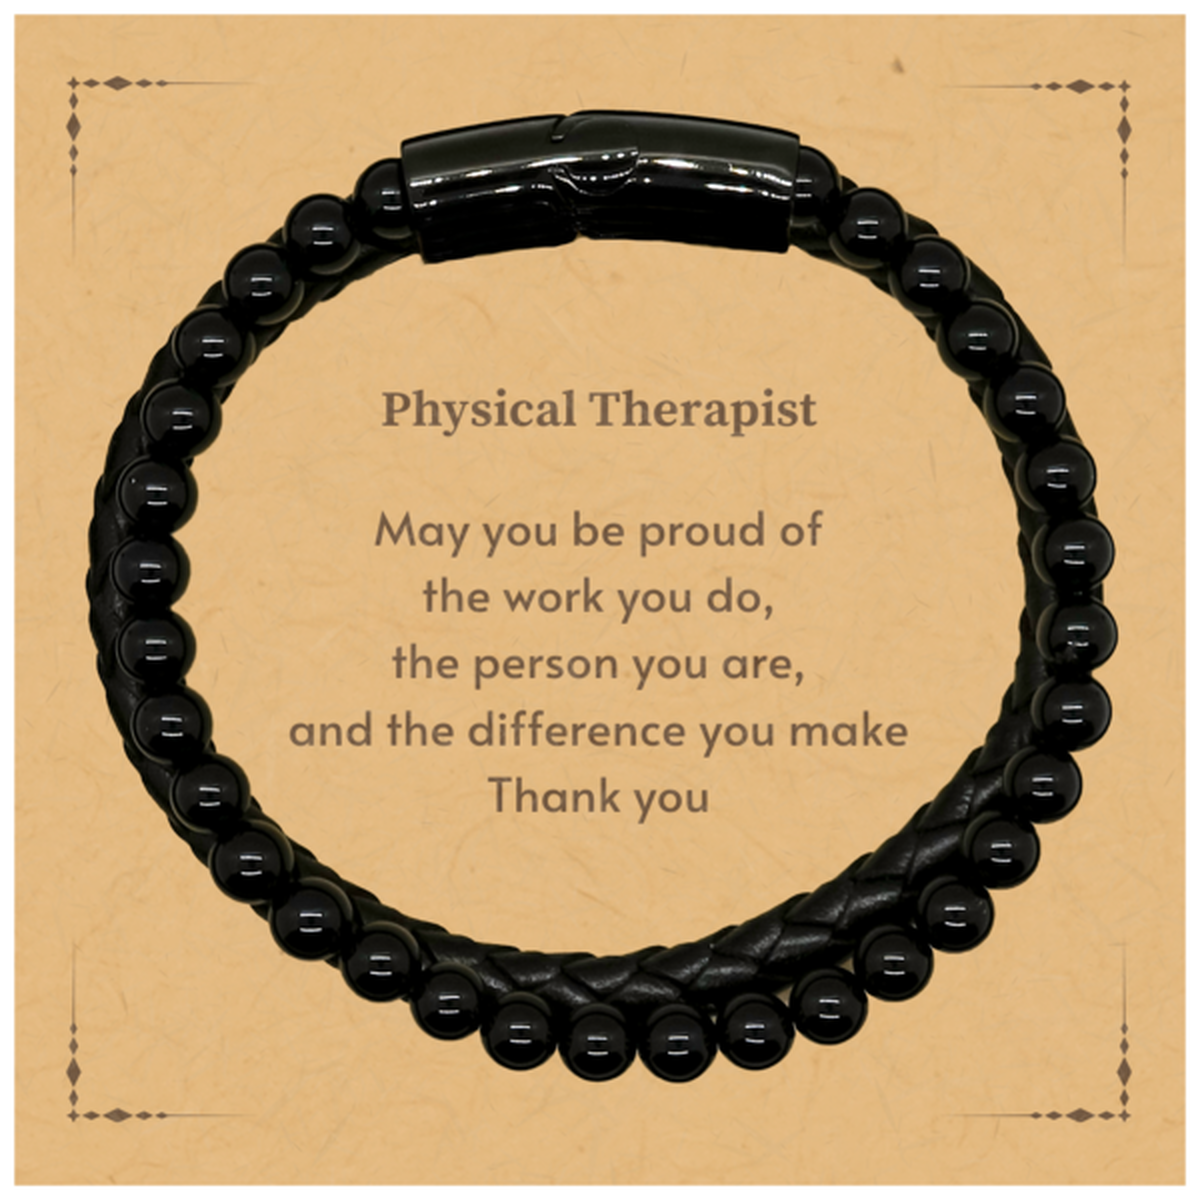 Heartwarming Stone Leather Bracelets Retirement Coworkers Gifts for Physical Therapist, Physical Therapist May You be proud of the work you do, the person you are Gifts for Boss Men Women Friends